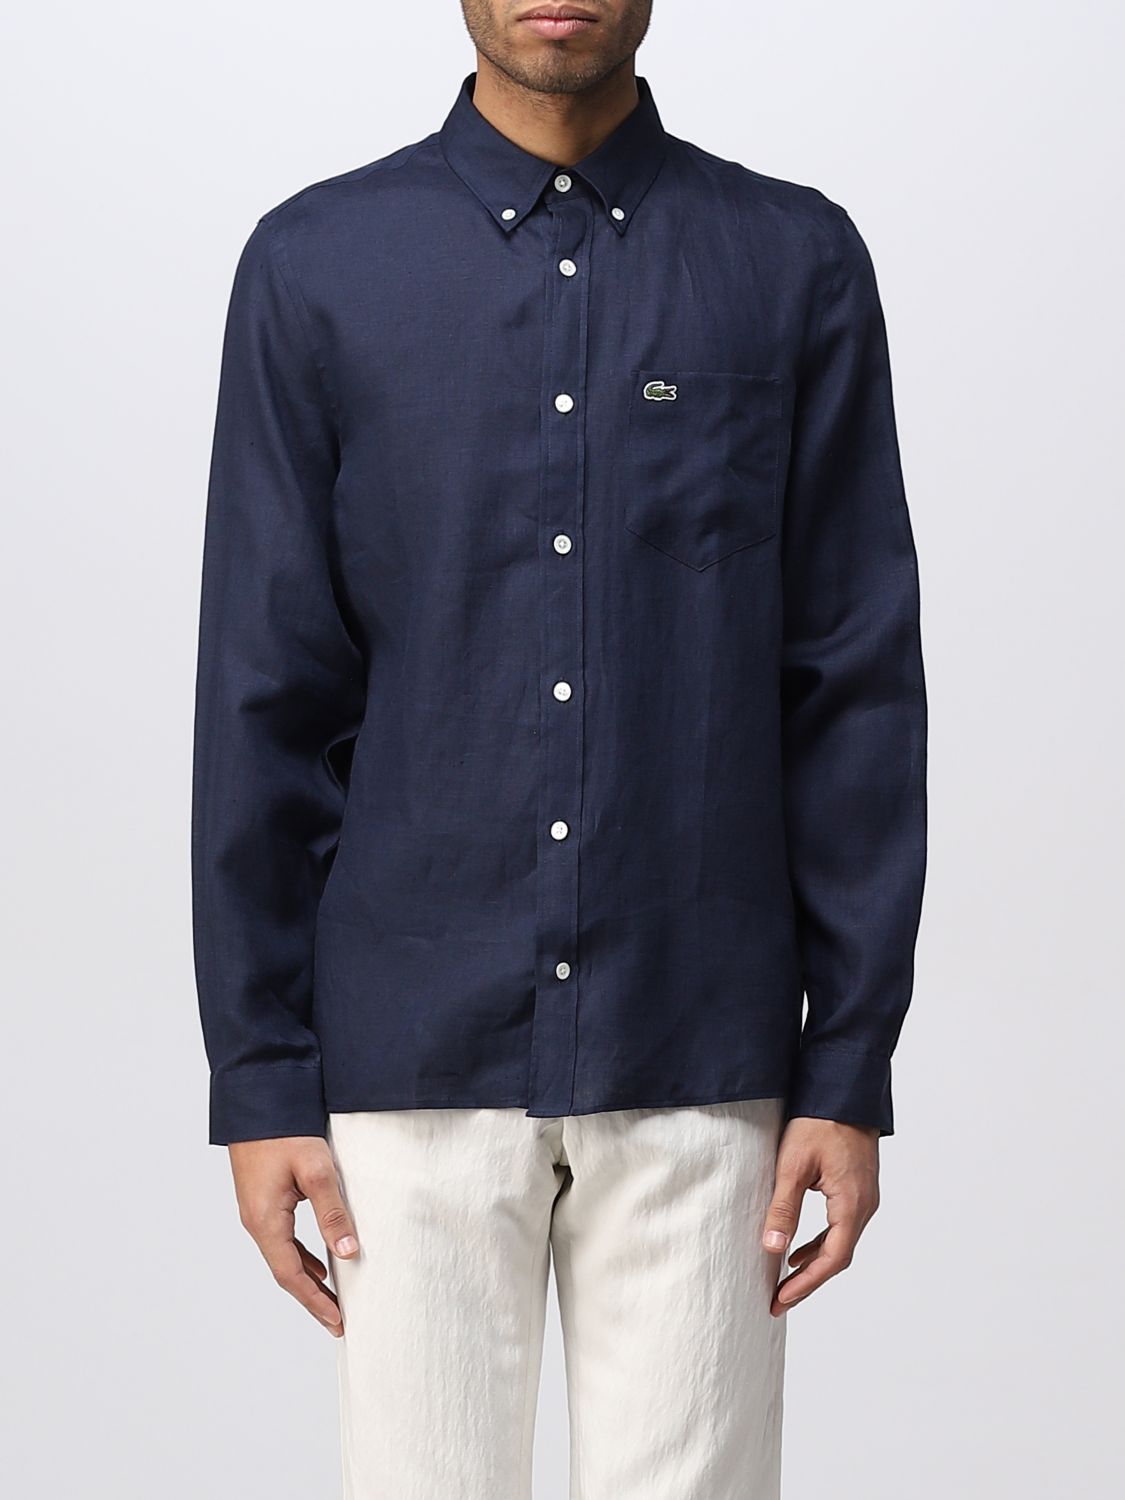 Lacoste Outlet: shirt for man - Navy | Lacoste shirt CH5692 online at ...